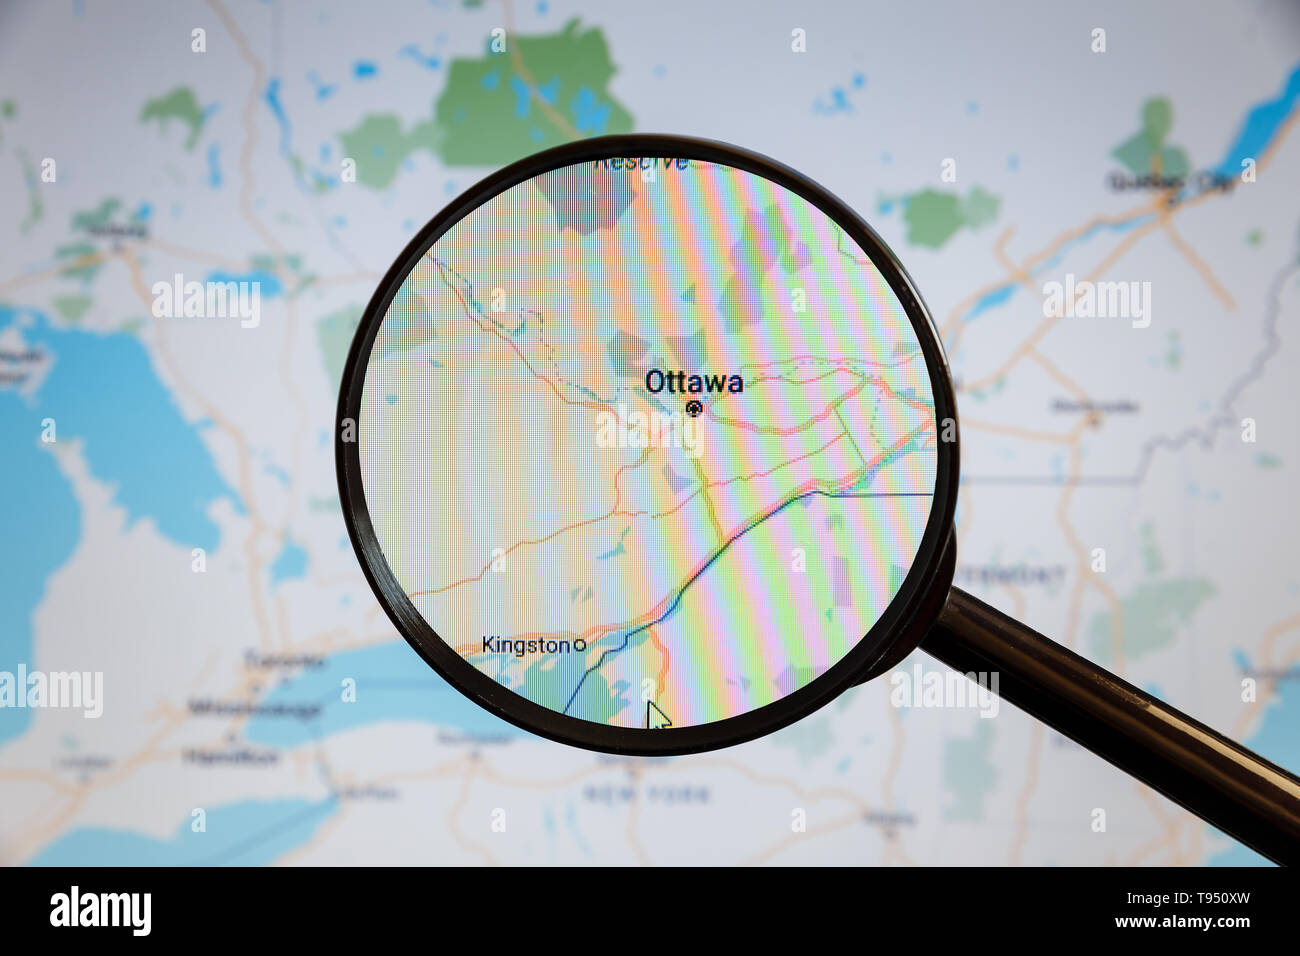 Ottawa, Canada. Political map. The city on the monitor screen through a magnifying glass. Stock Photo